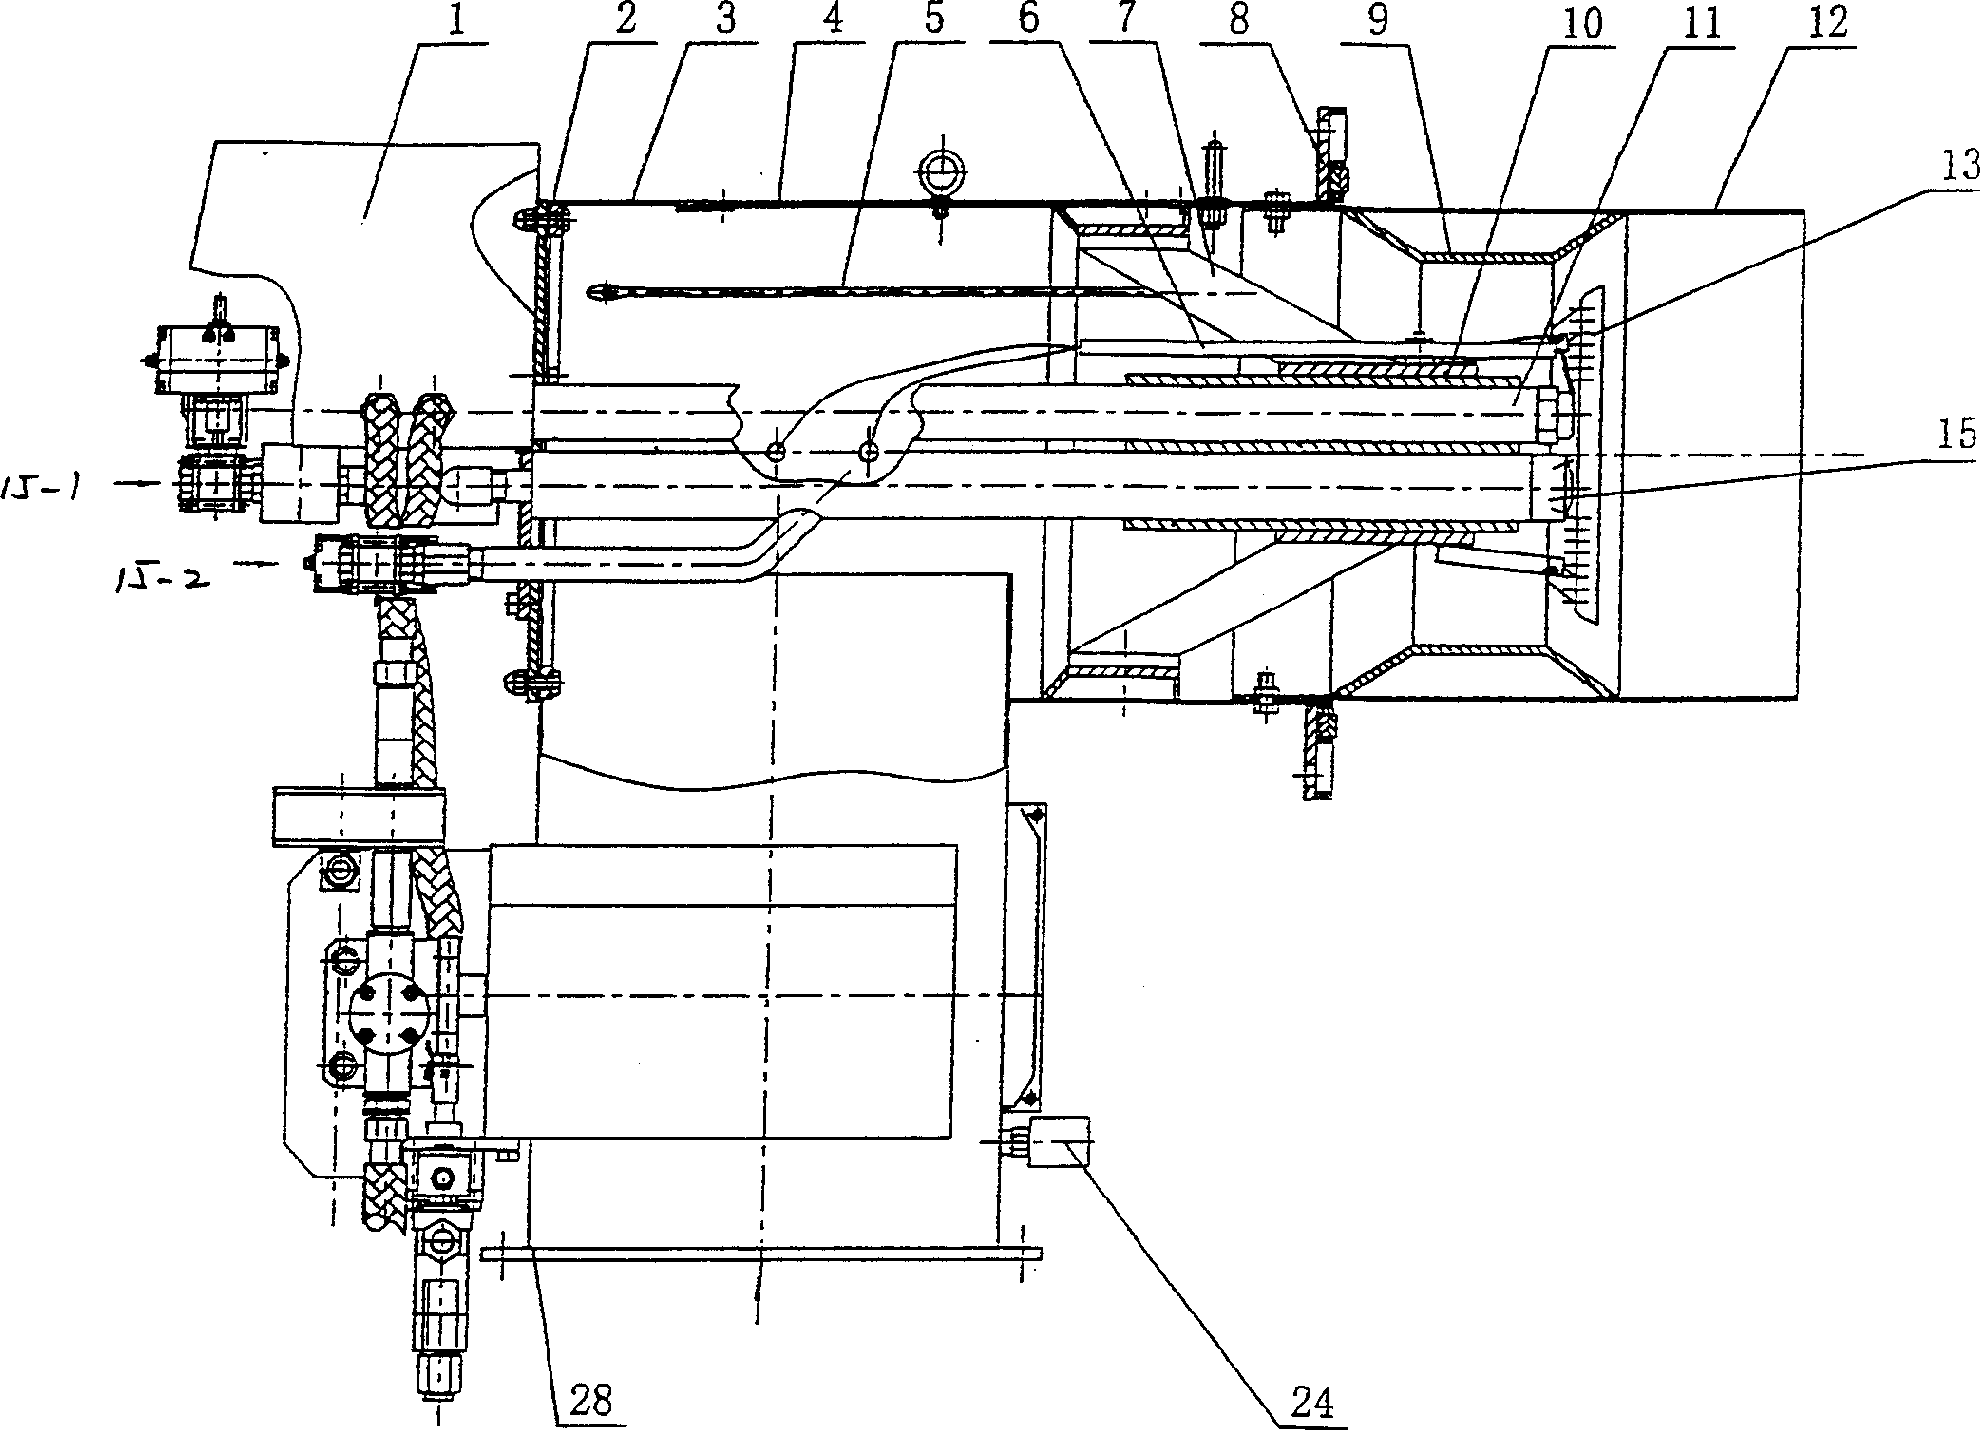 Frequency conversion and automatically controlled dual-purpose boiler with built-in precombustion chamber using coal water slurry or oil as fuel